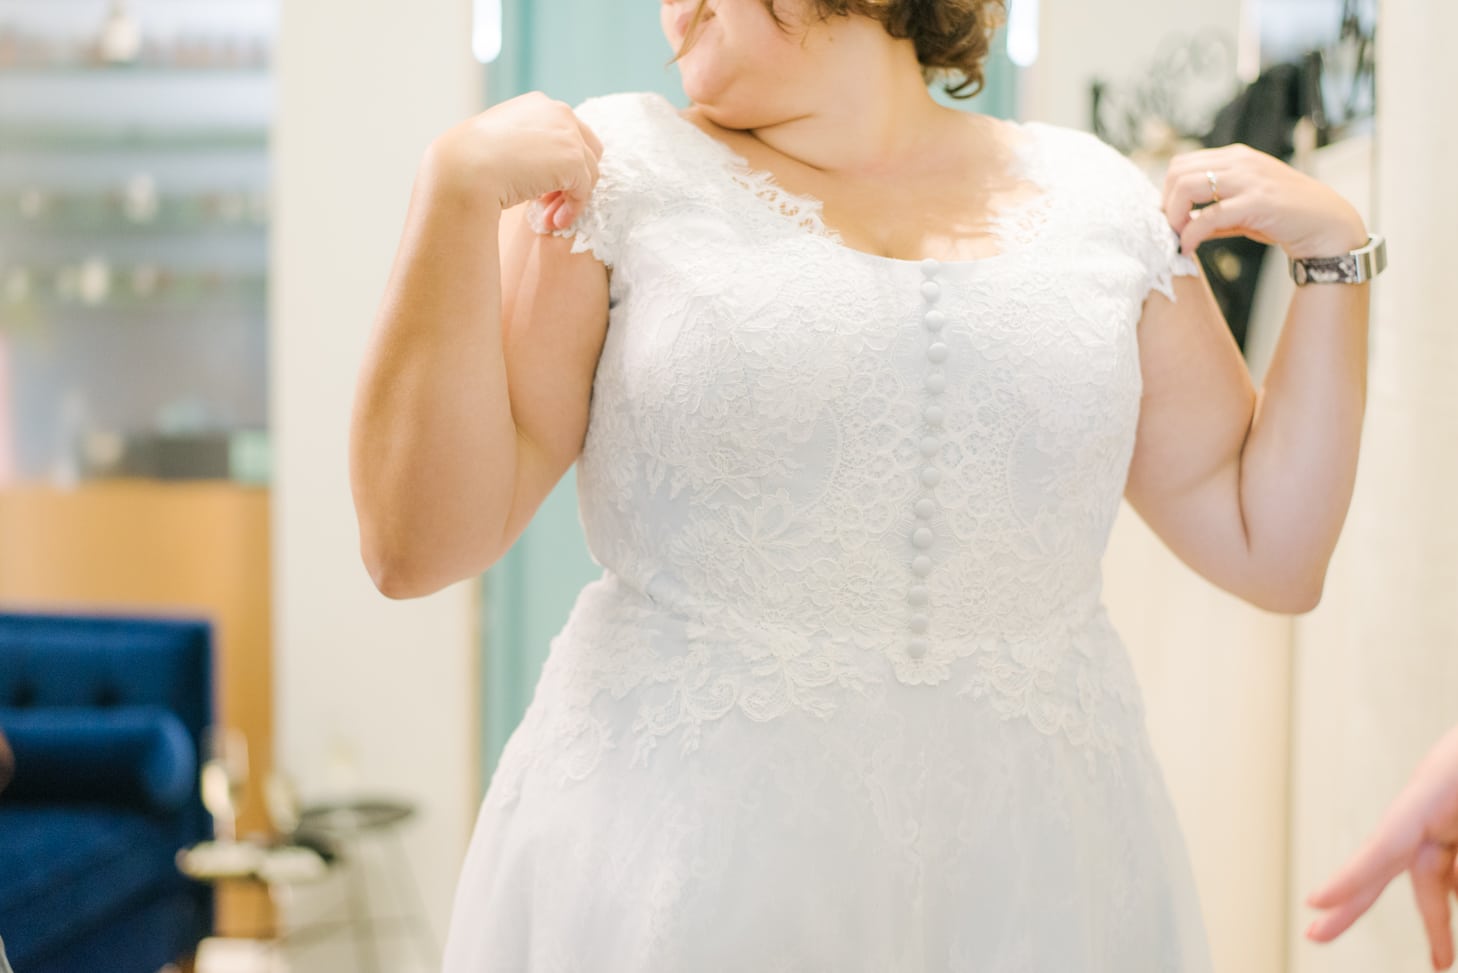 A woman looks at herself while trying on wedding dresses